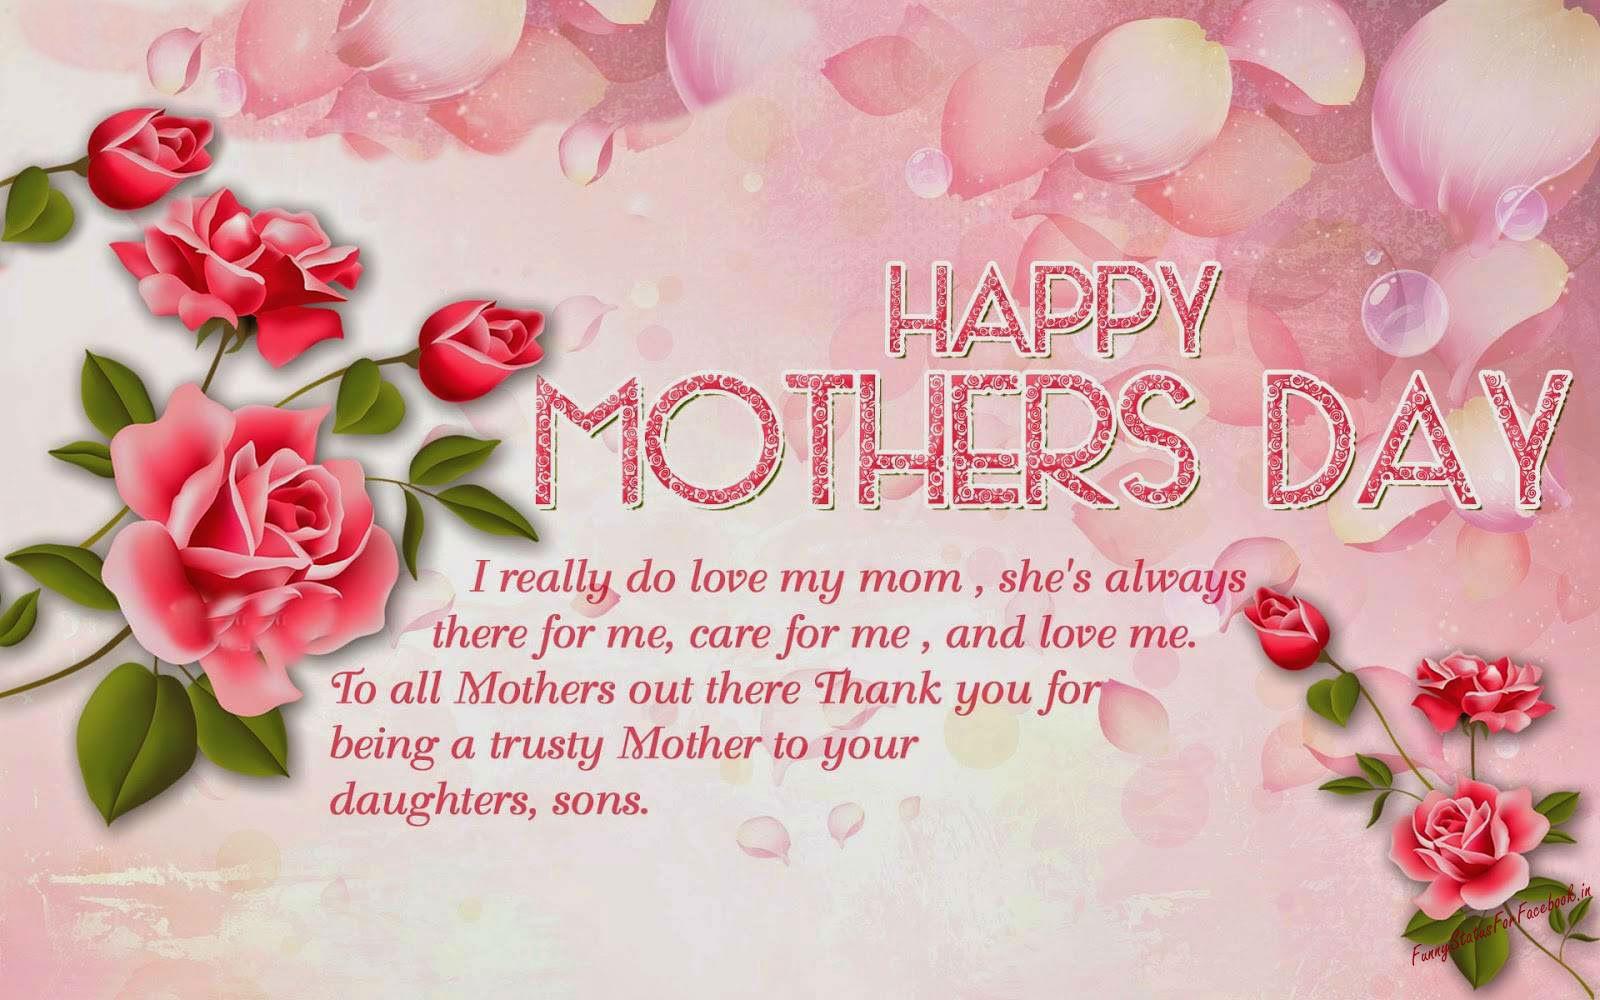 Happy Mothers Day Images with Quotes